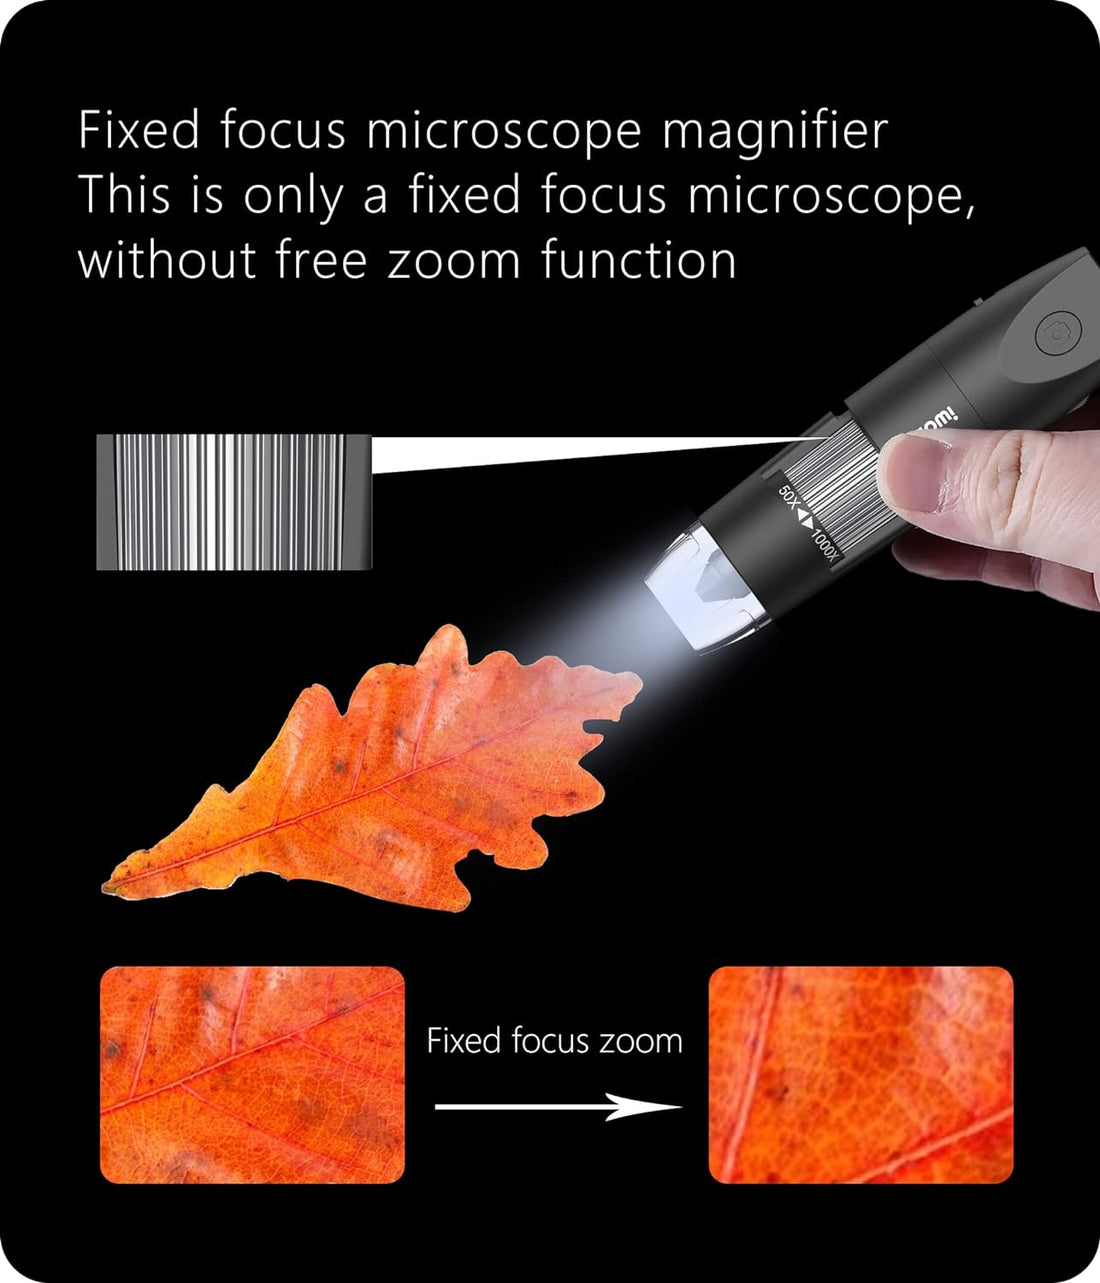 Digital Microscope Wireless Pocket Handheld USB Microscopes, 50x-1000x Zoom Fixed Focus HD Magnifier with LEDs, Inspection Camera Compatible with iPhone, Android Phone, MacBook, Windows PC (Black)